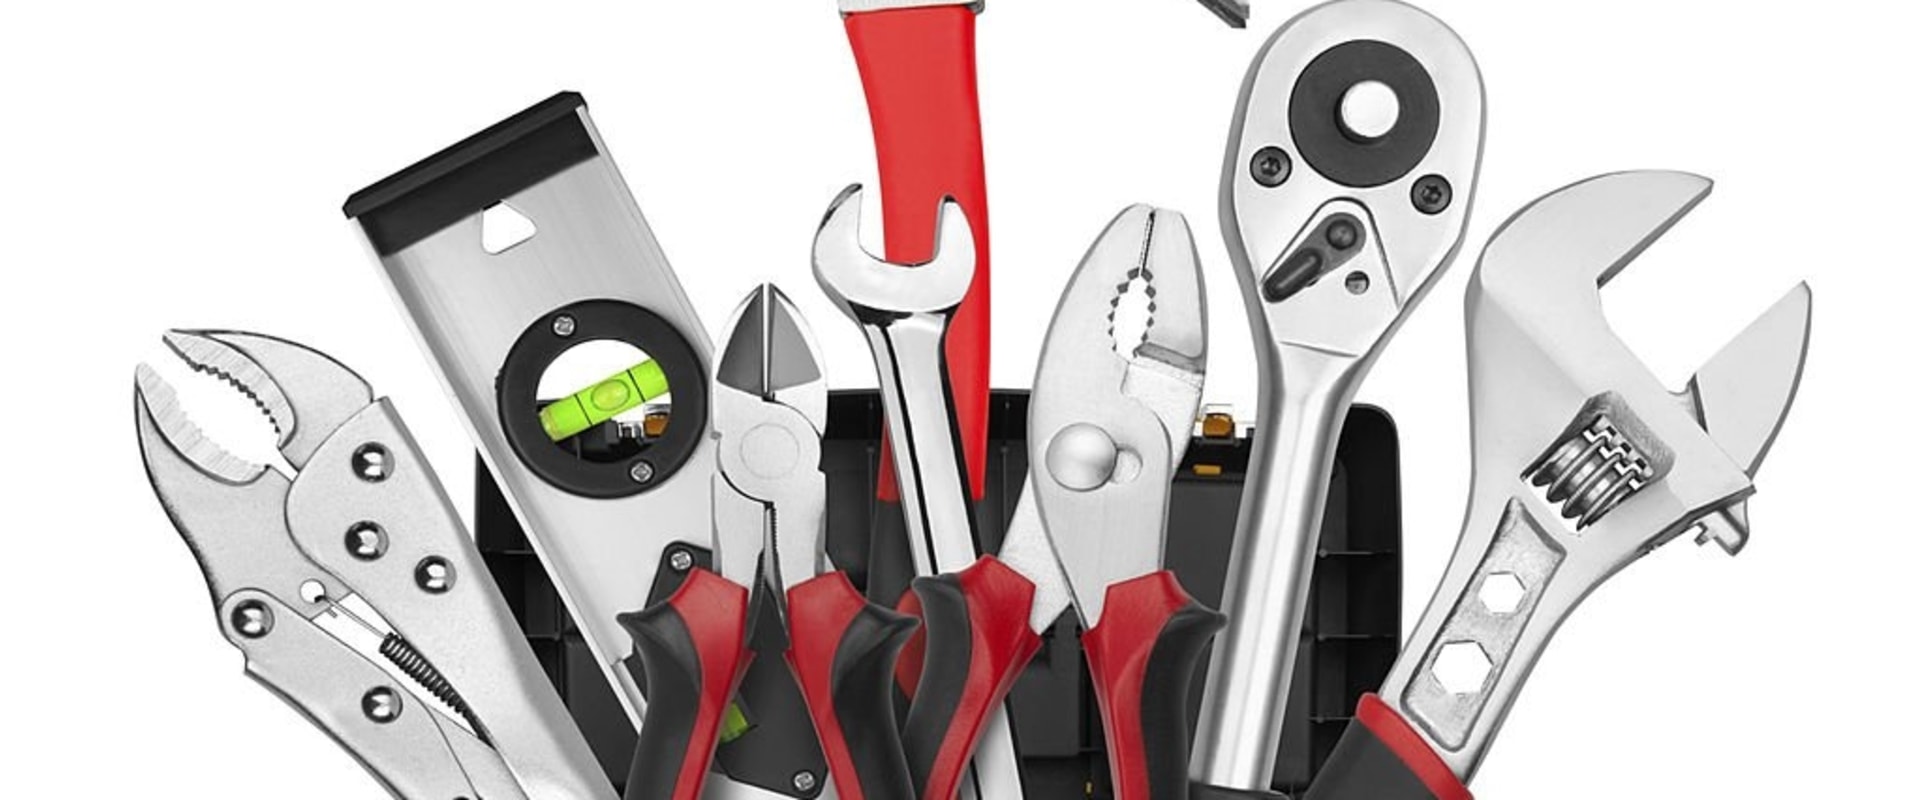 Are hand tools fixed assets?